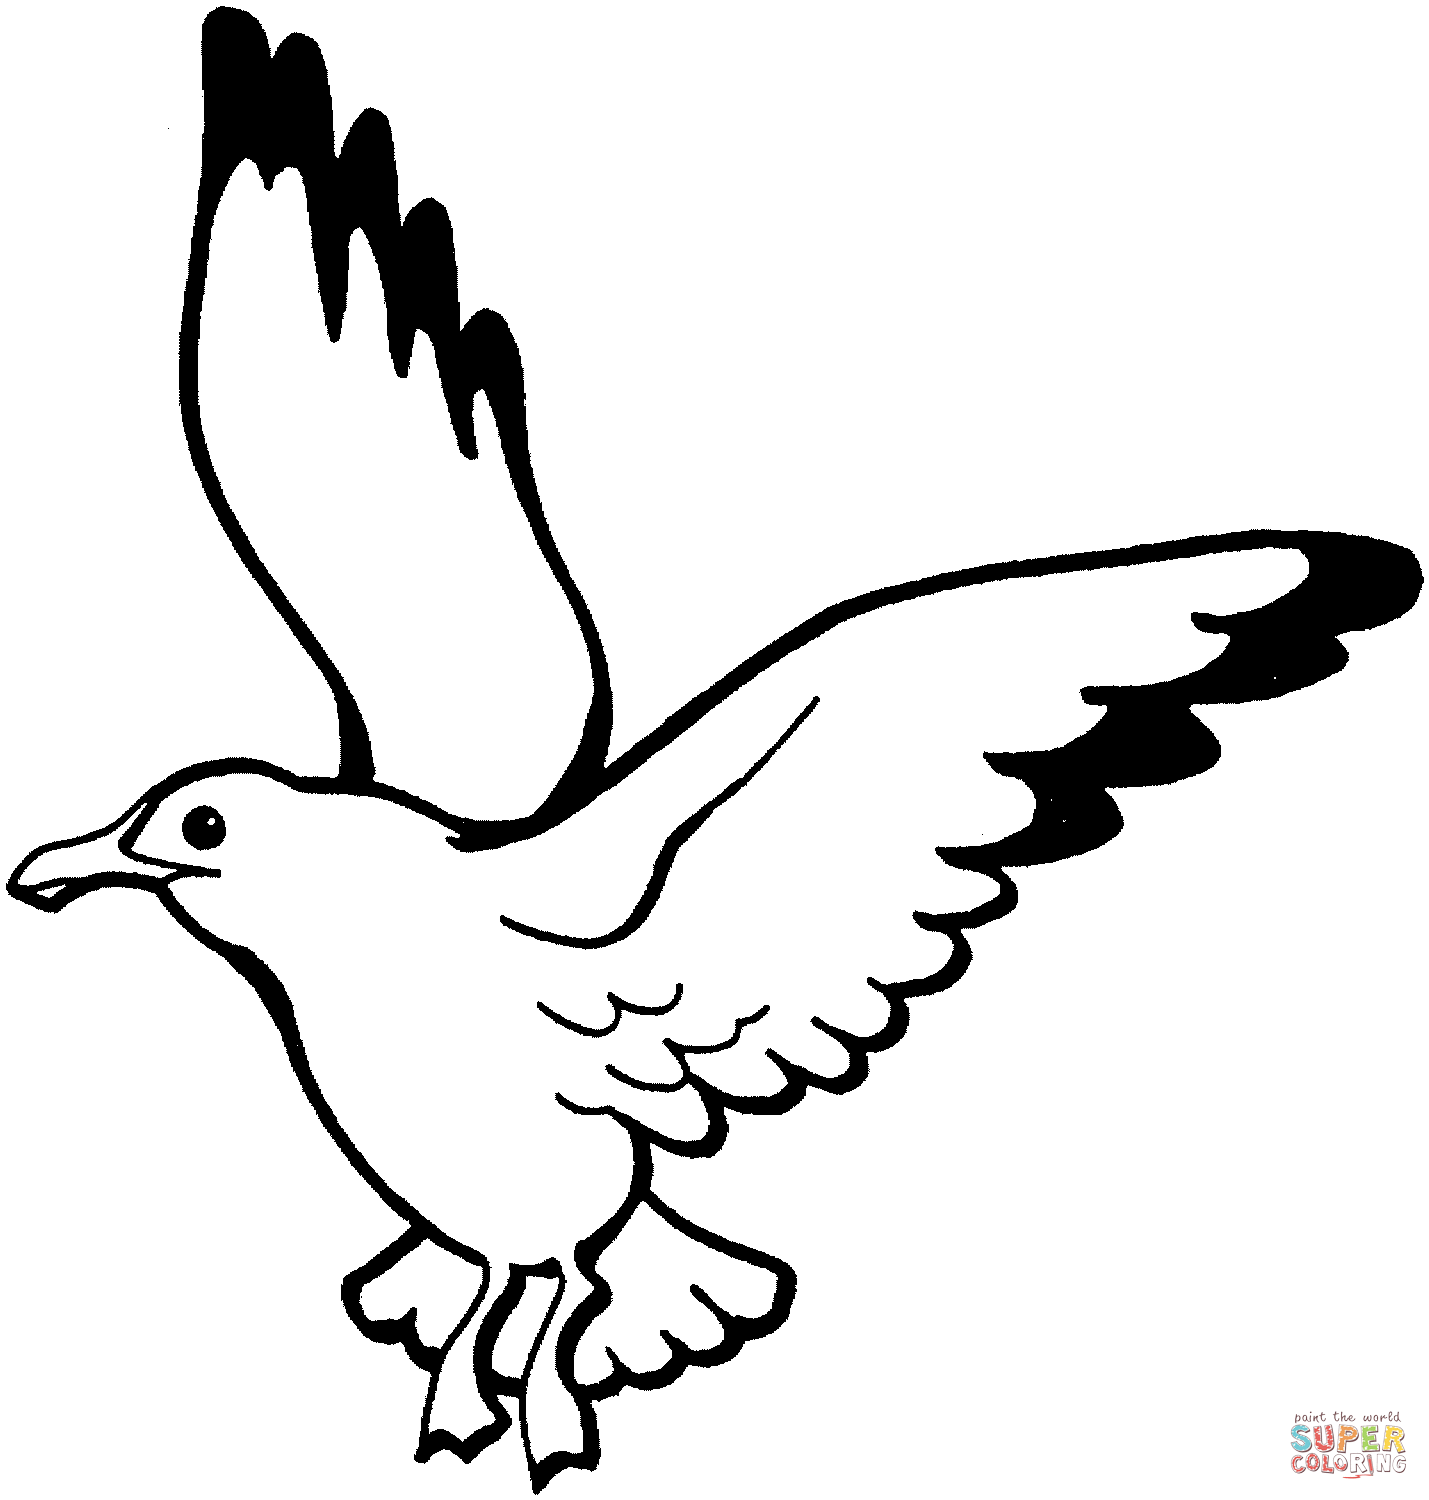 Seagull Photo Drawing | Drawing Images